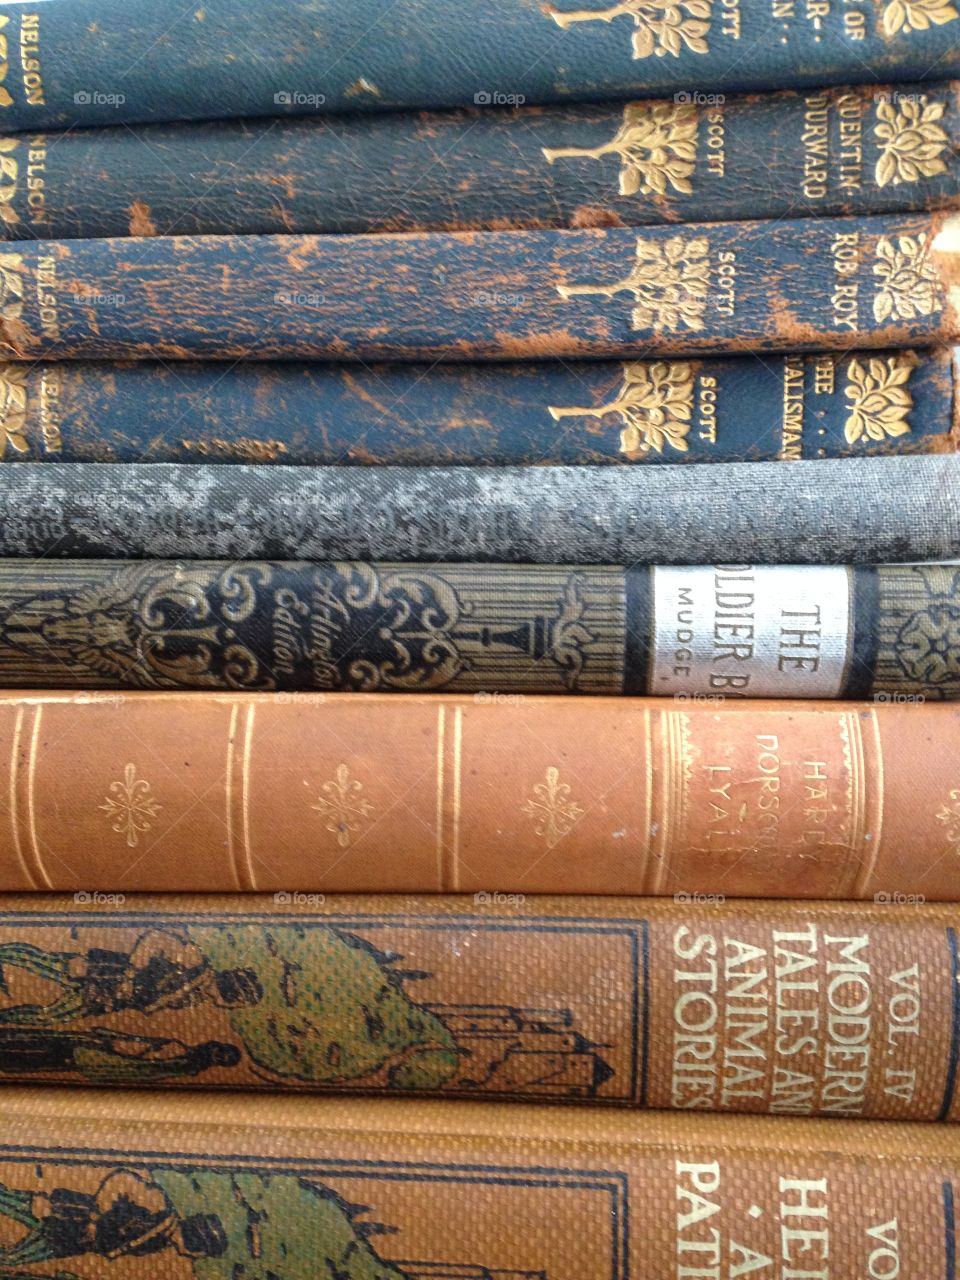 Old books. A stack of old hardcover books. 